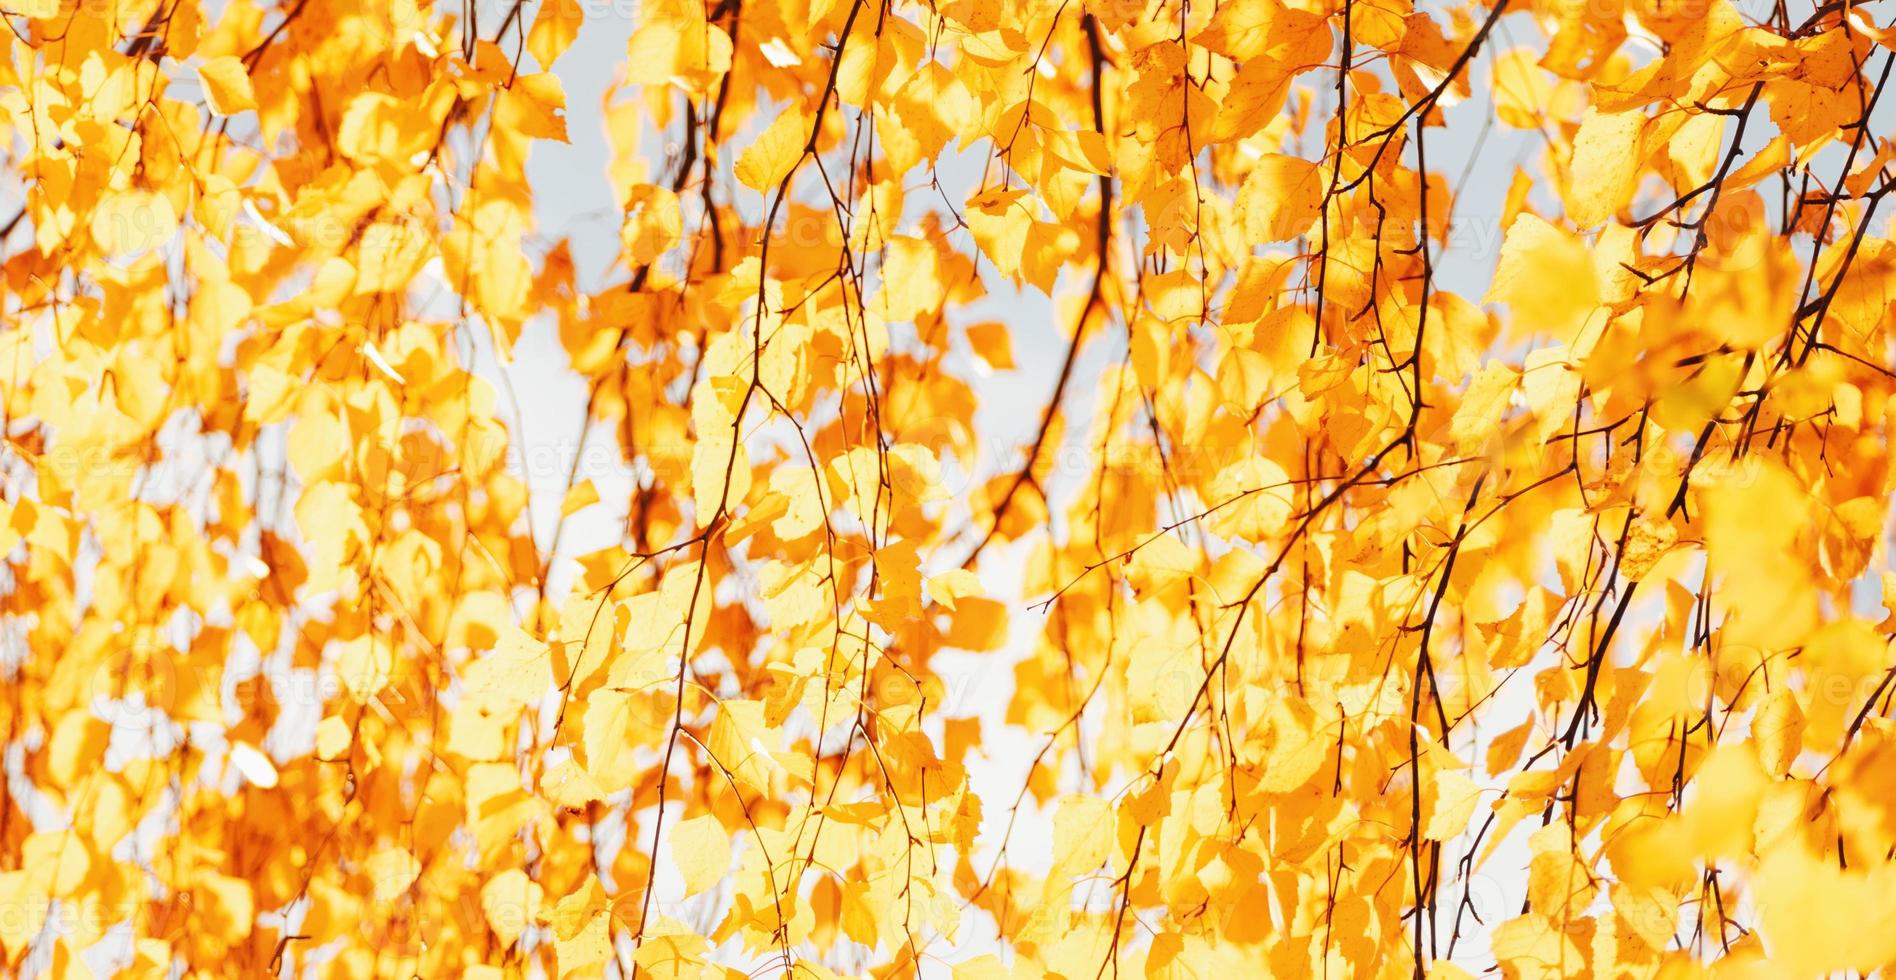 Autumn foliage background, fall nature blurred banner, yellow birch tree leaves in the sun photo